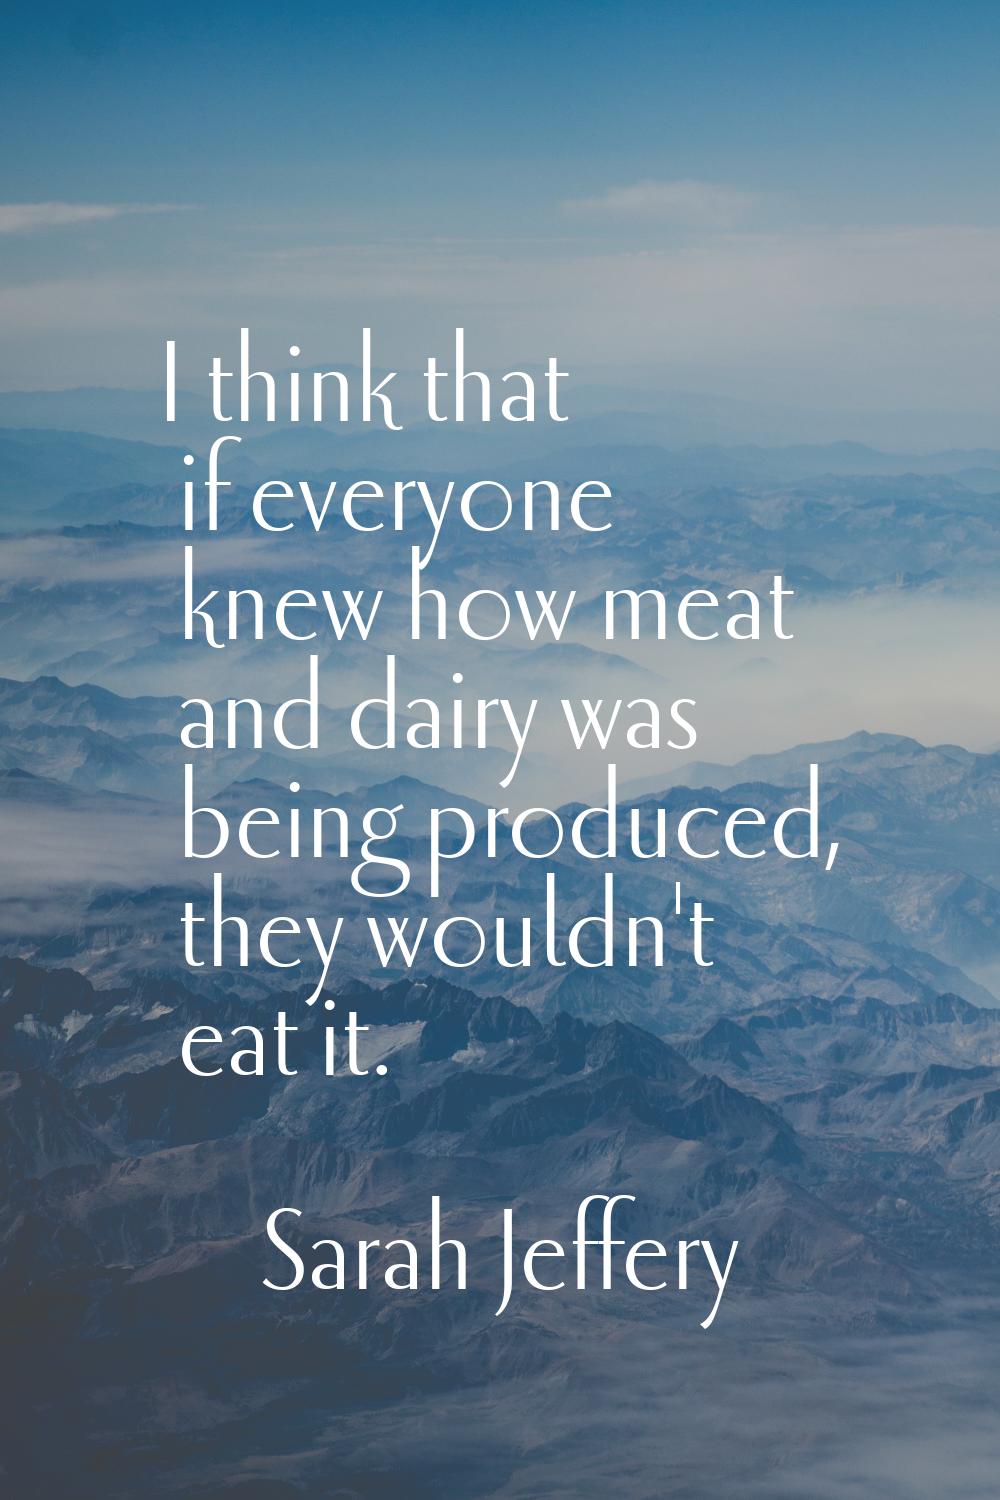 I think that if everyone knew how meat and dairy was being produced, they wouldn't eat it.